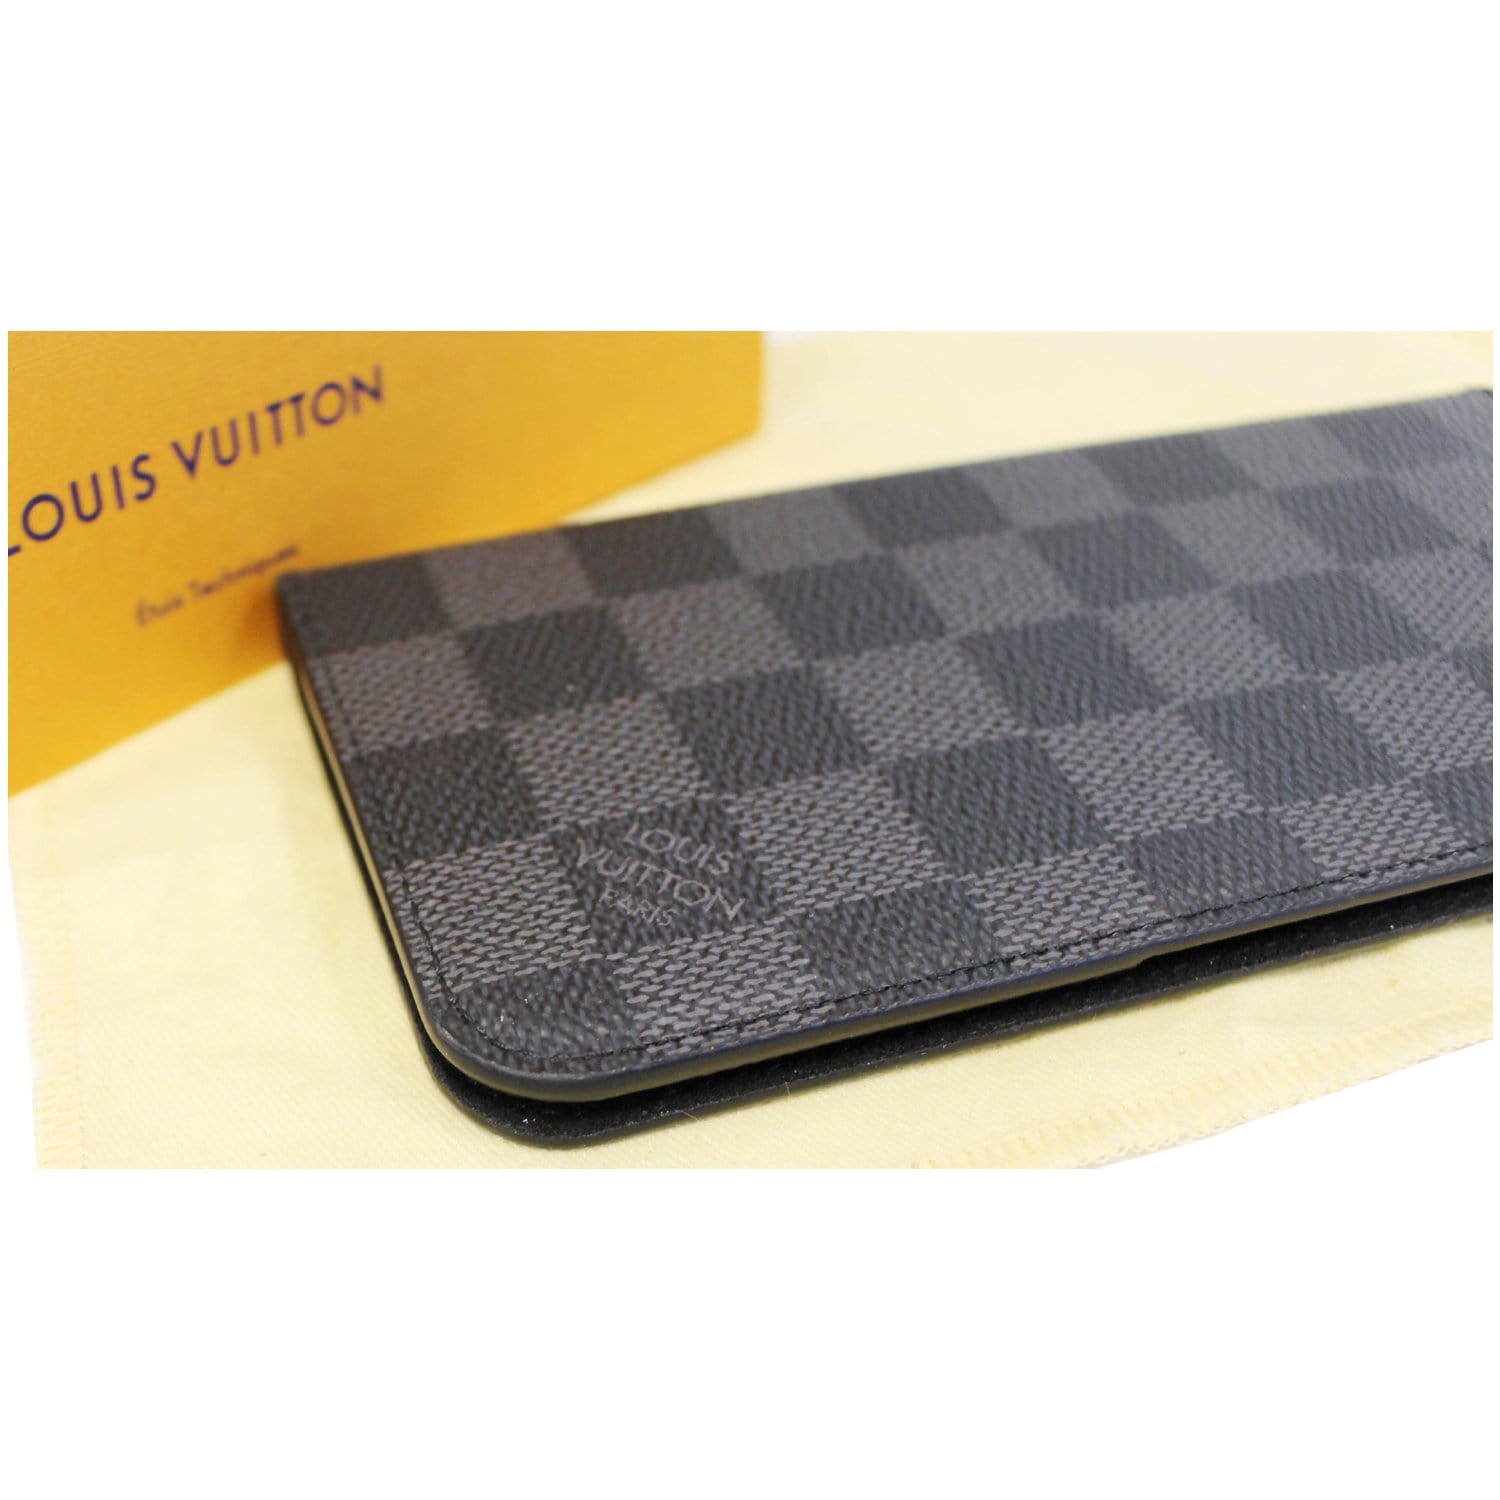 Louis Vuitton-IPhone 7+ Folio - Couture Traders